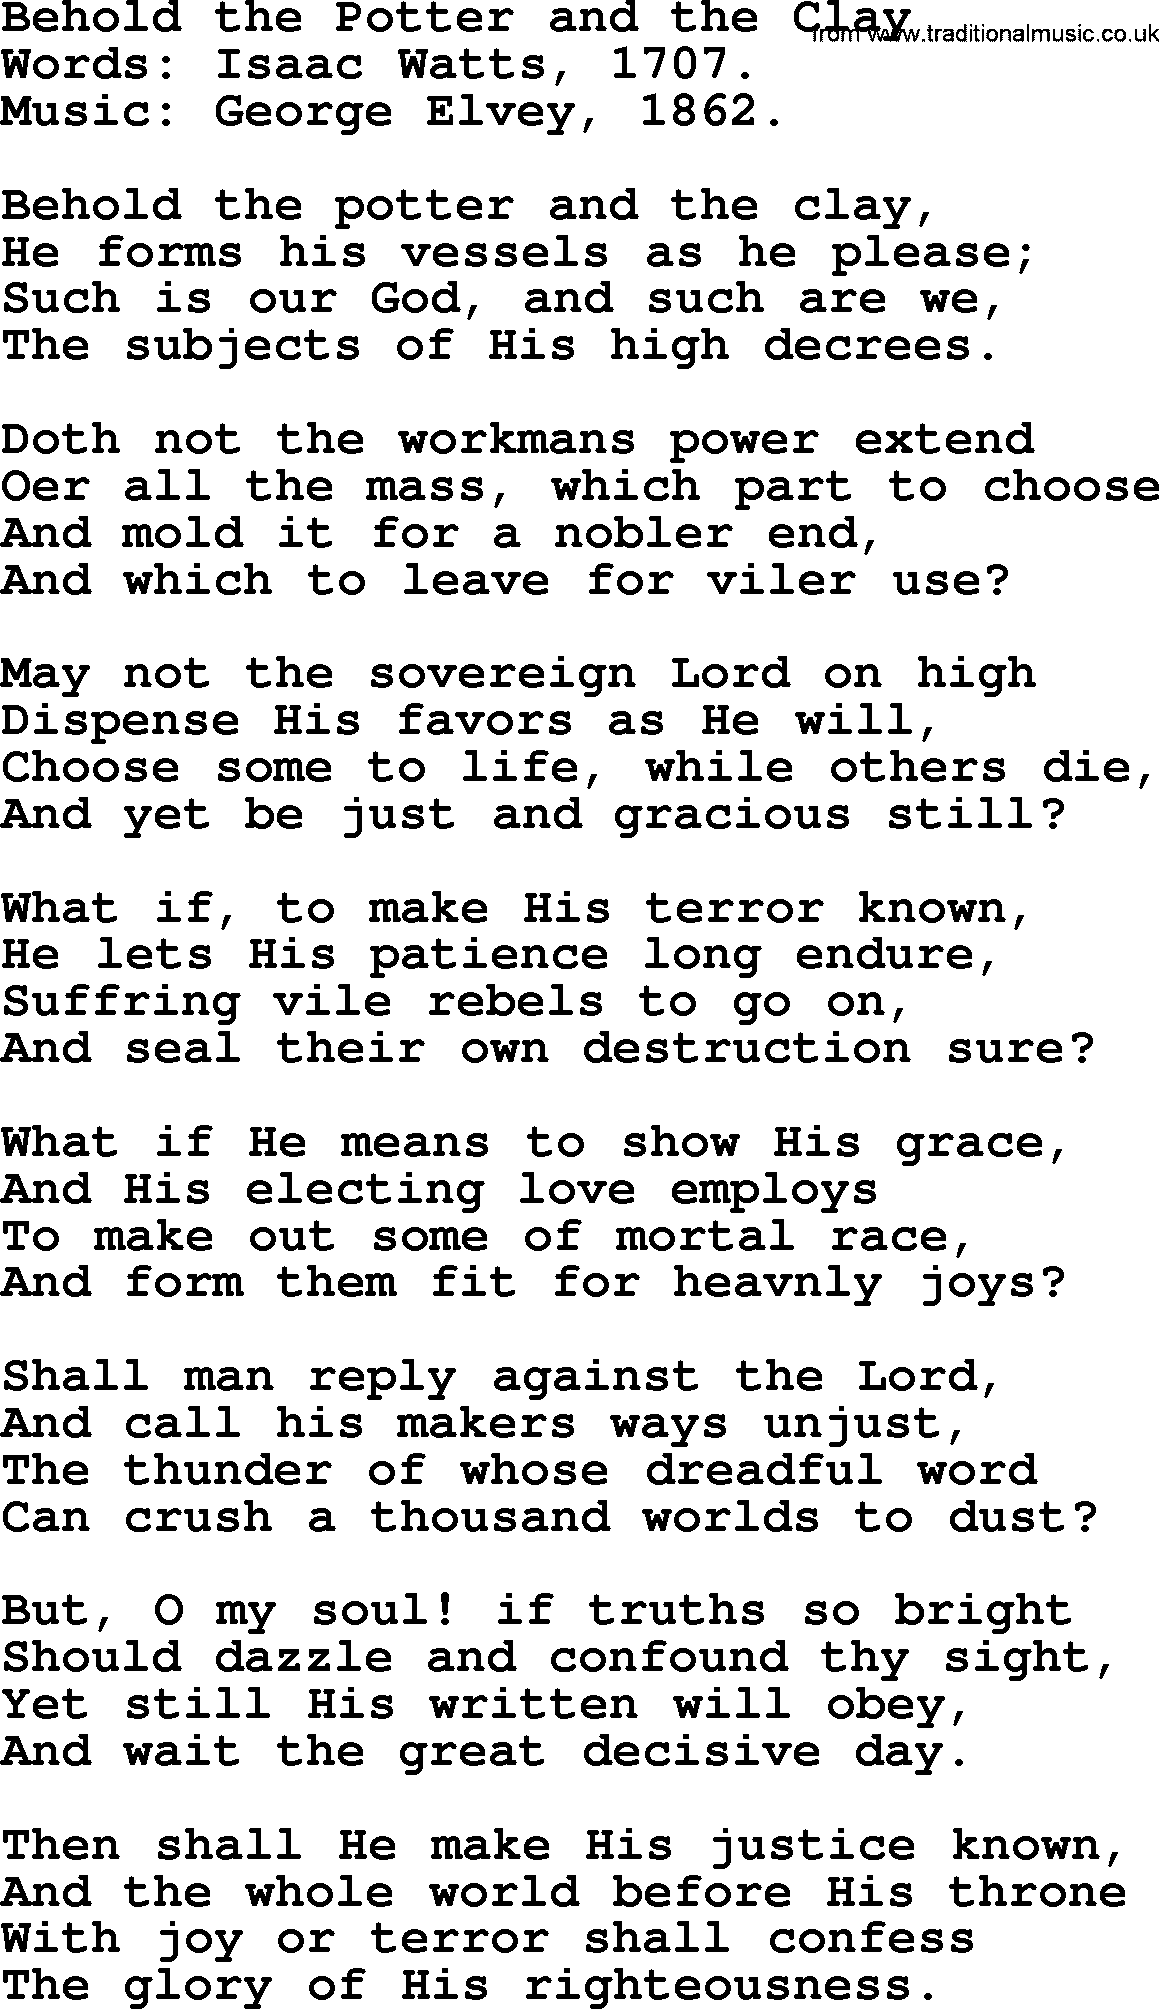 Isaac Watts Christian hymn: Behold the Potter and the Clay- lyricss